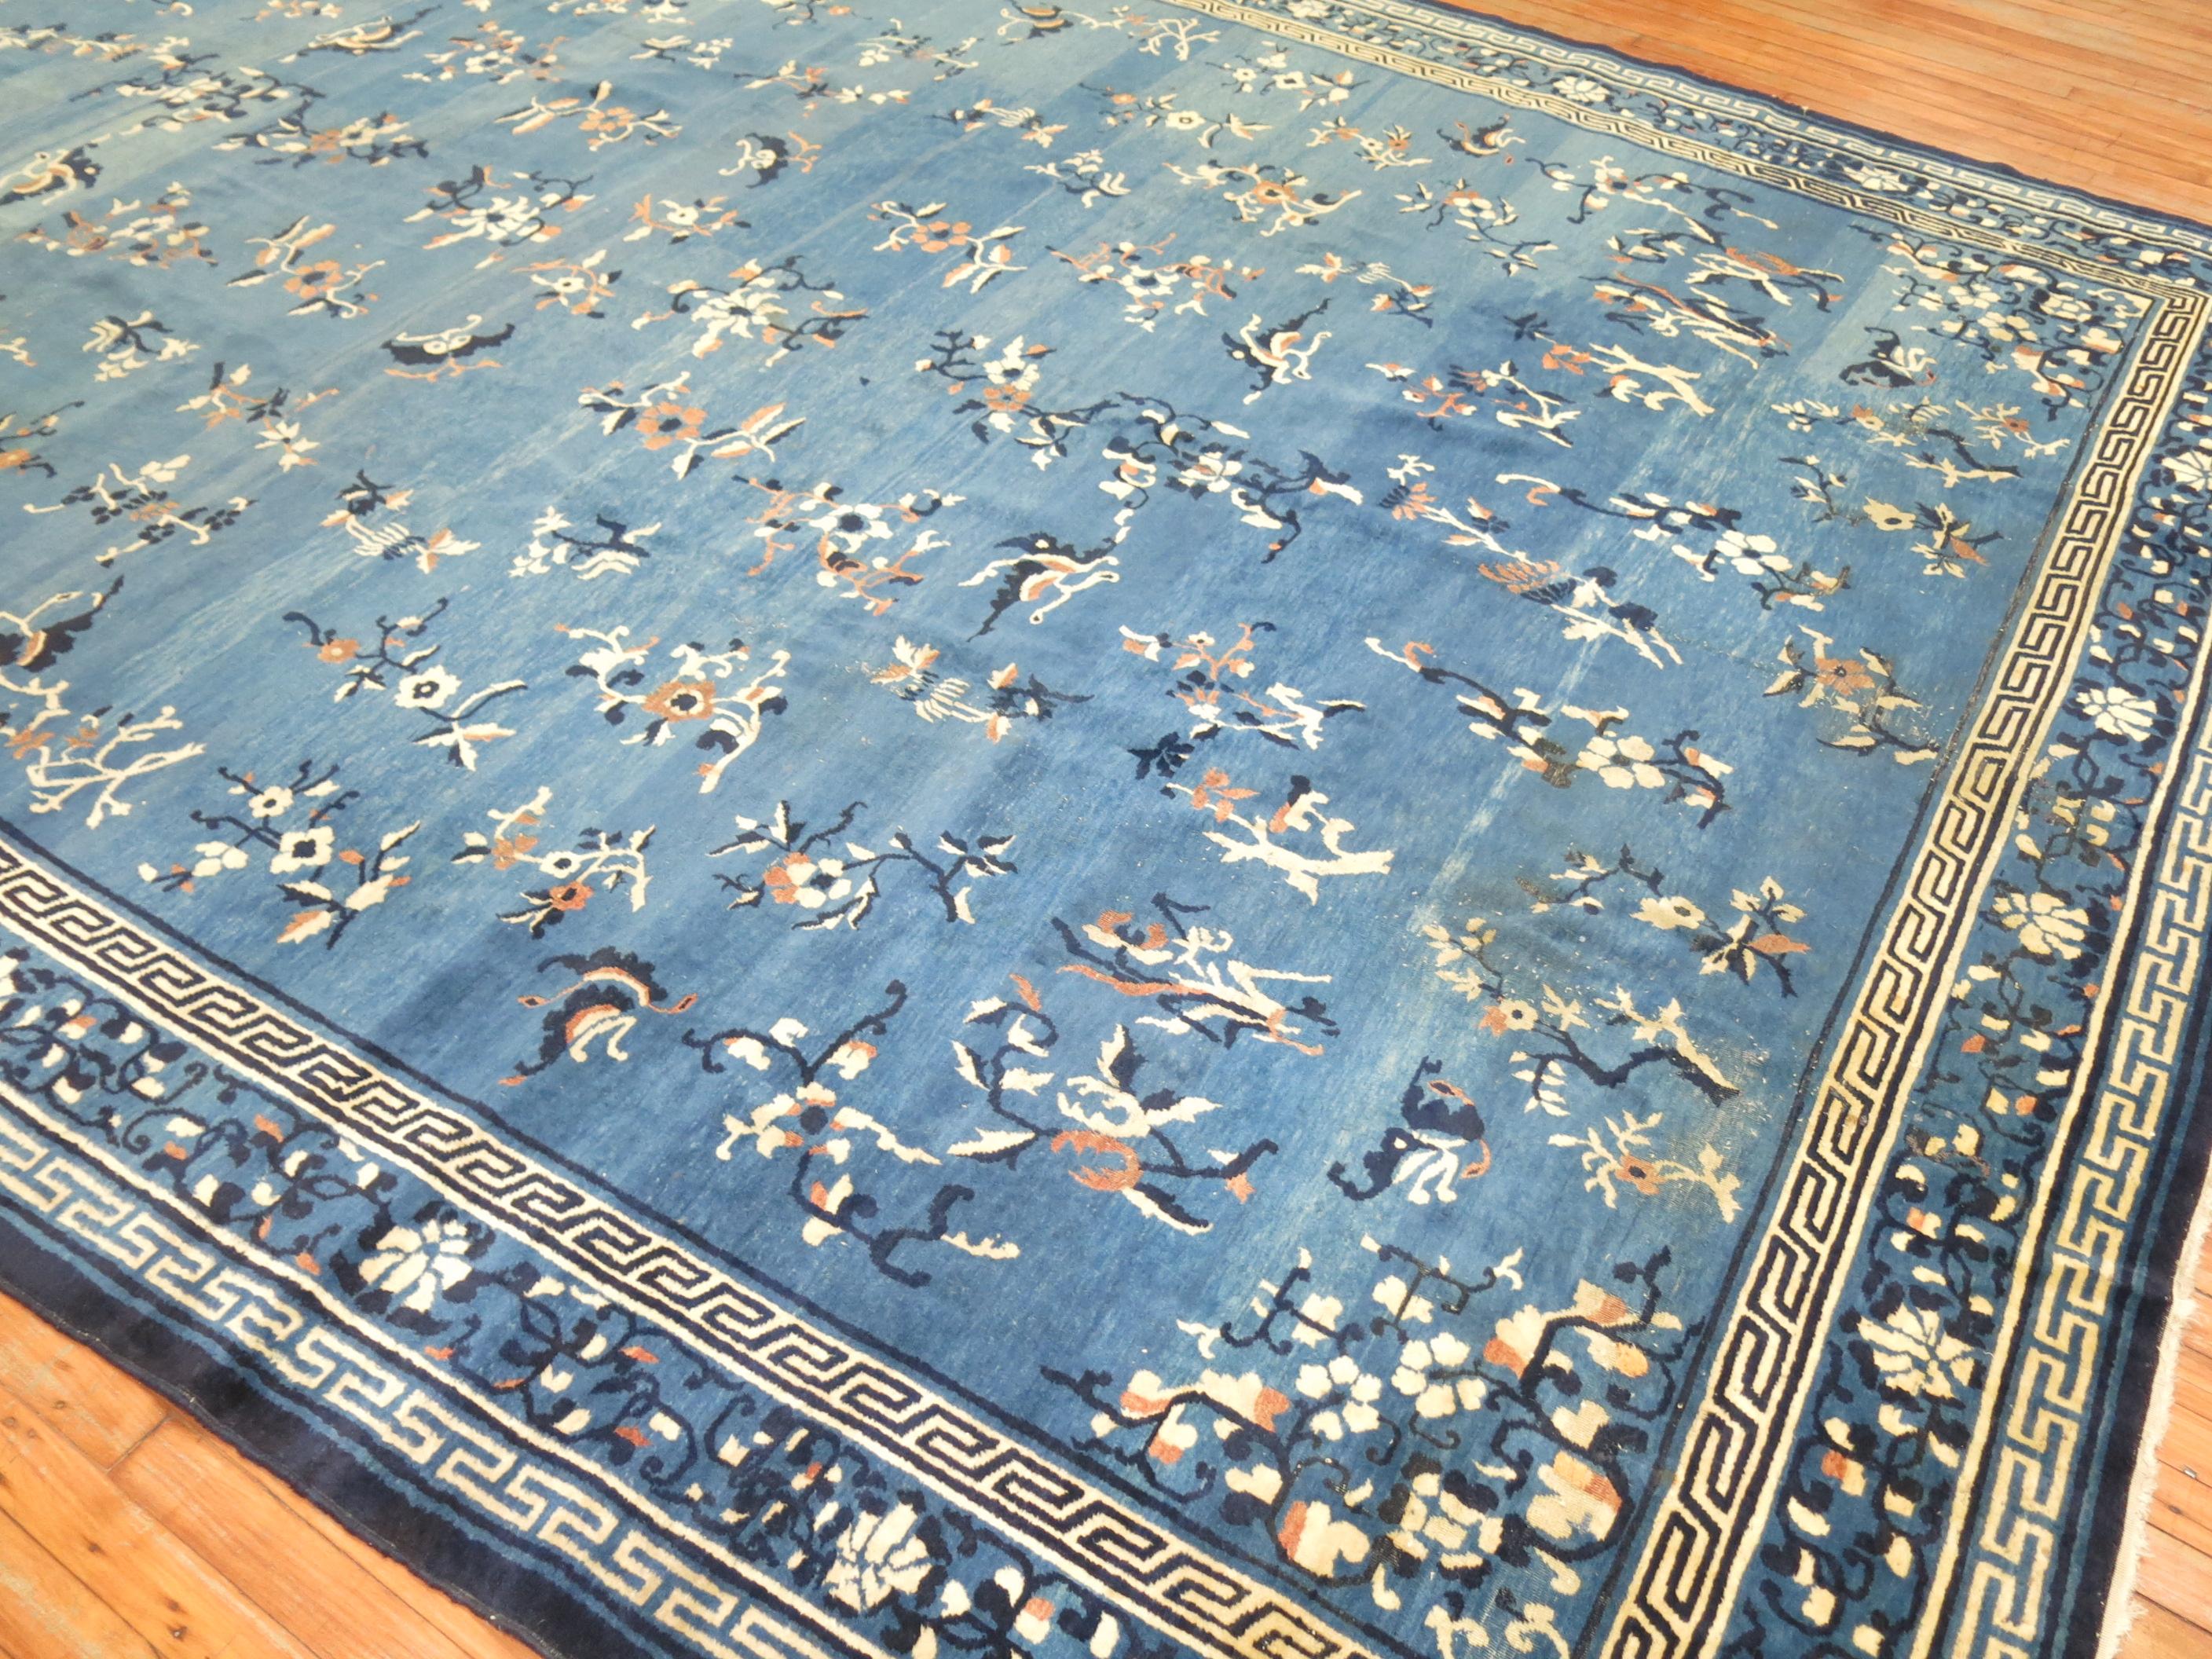 Blue Antique Shabby Chic Chinese Rug 5